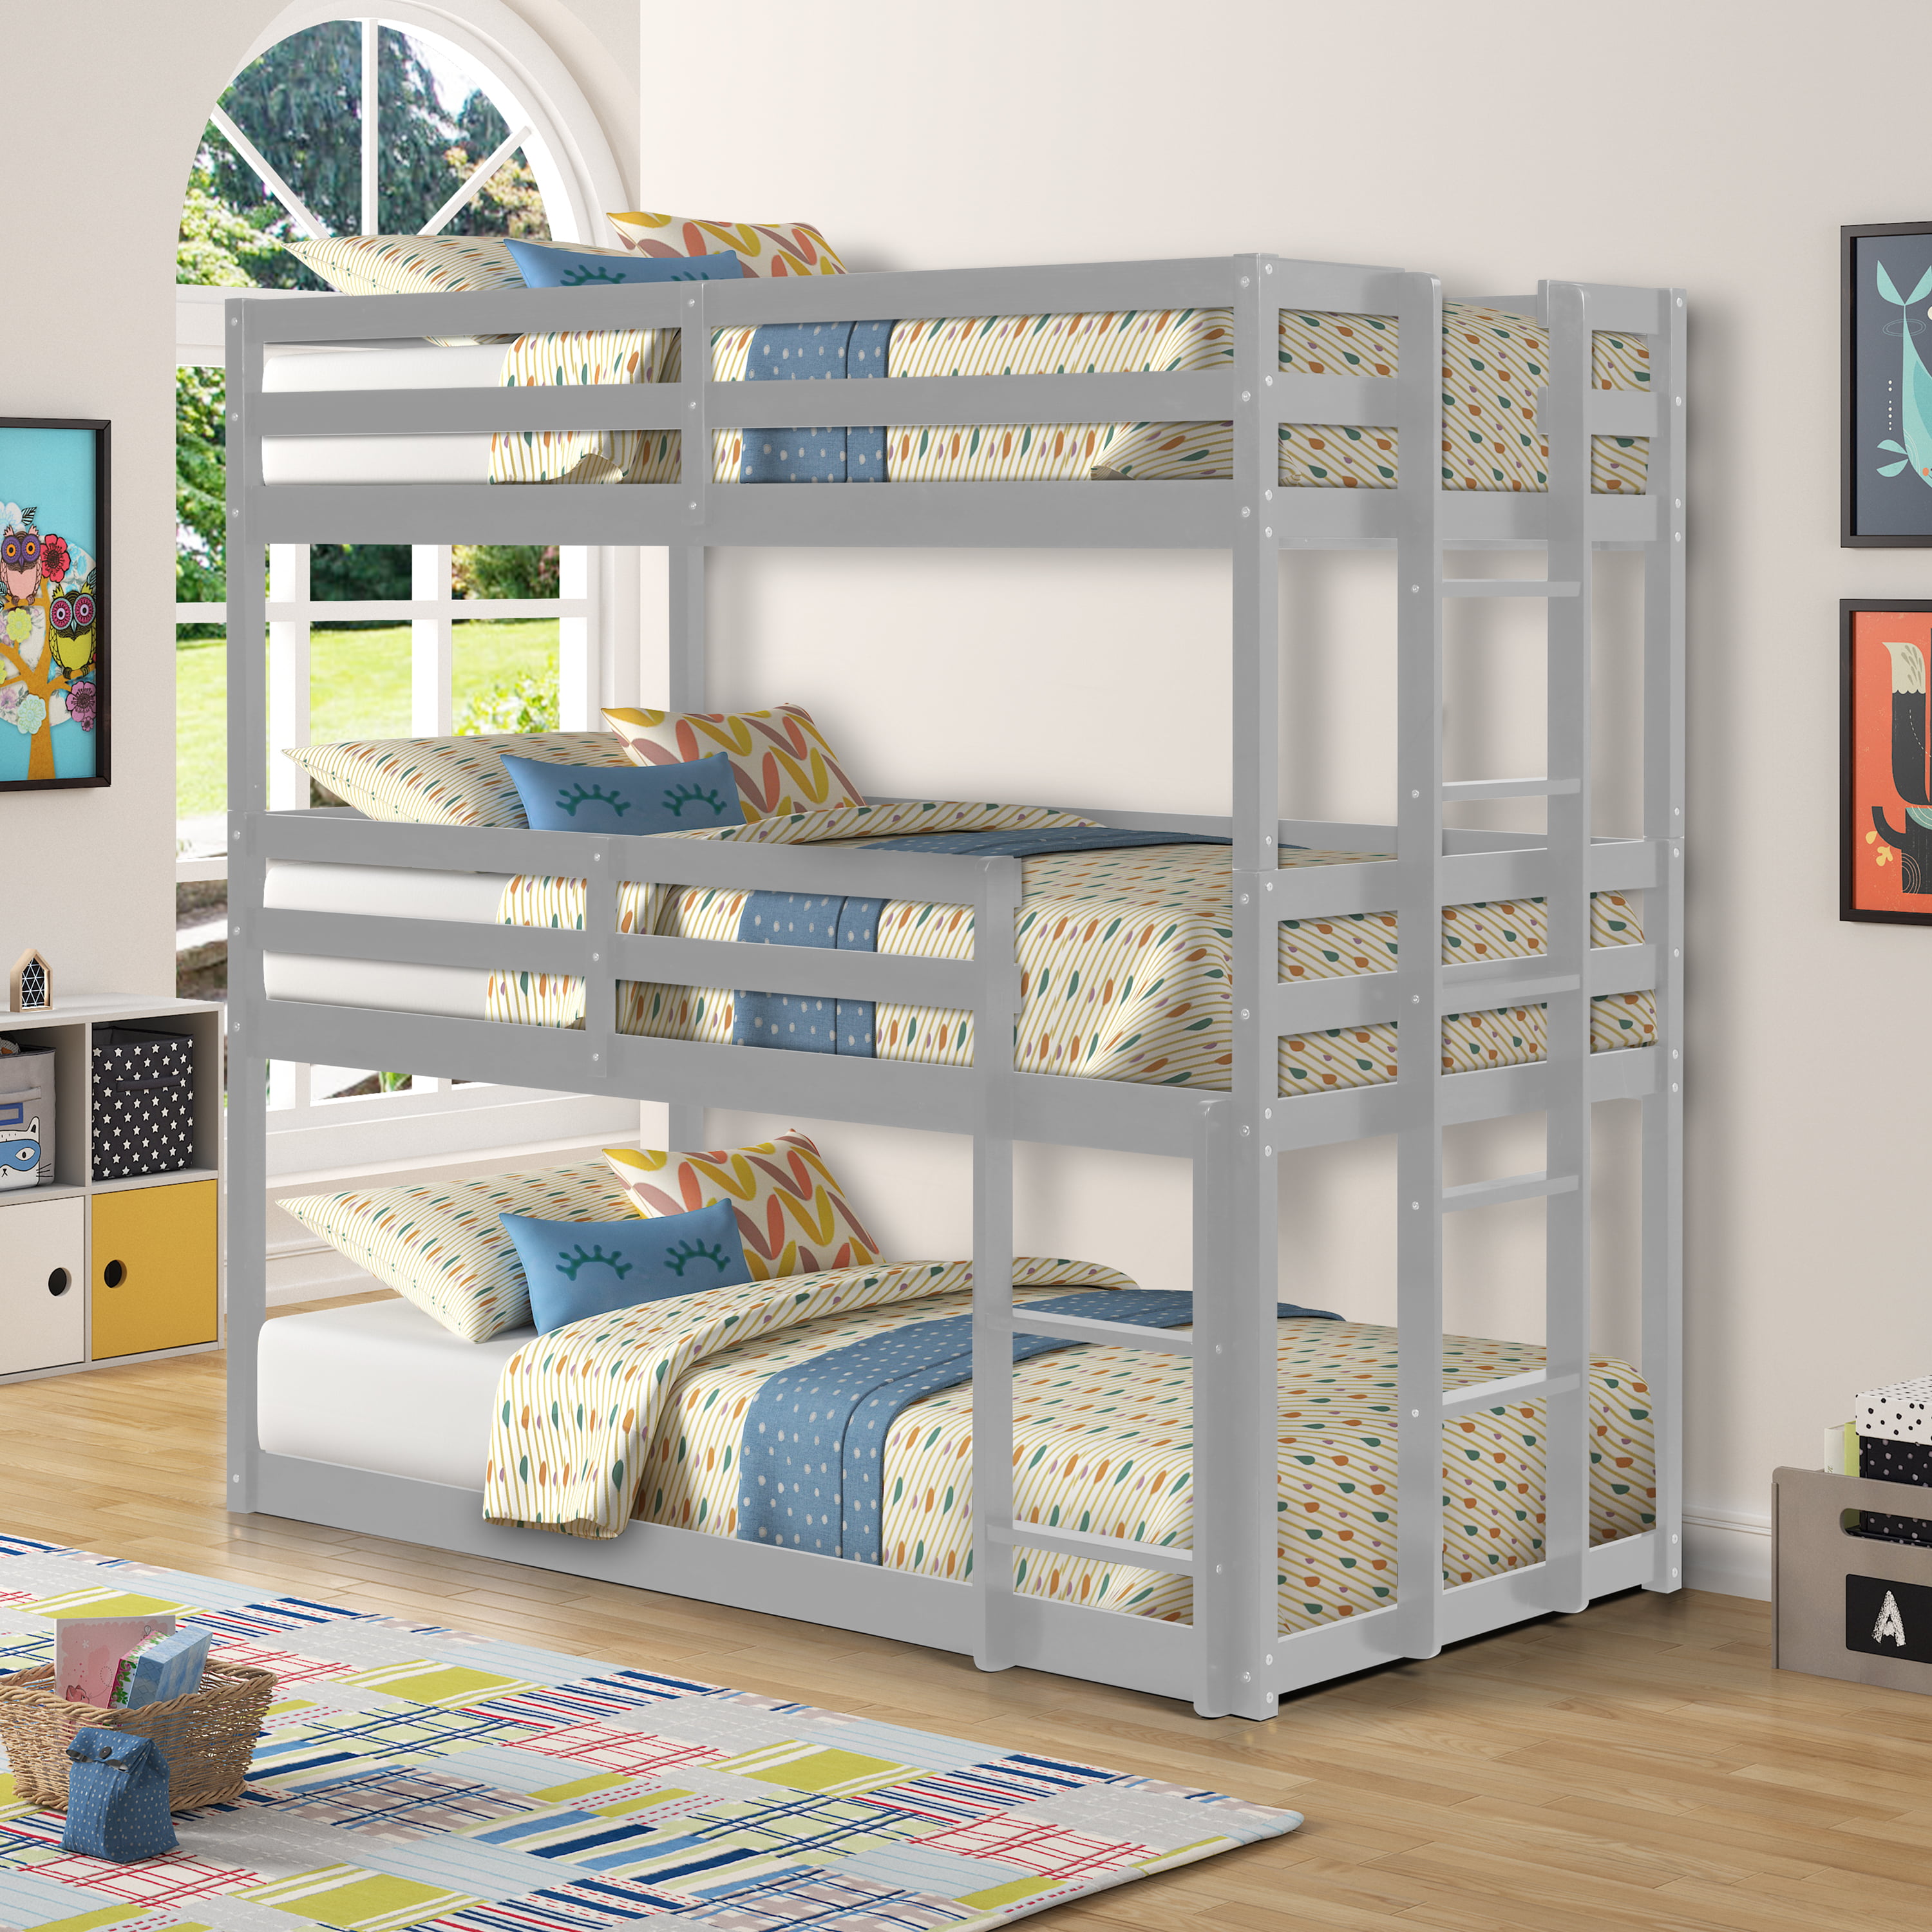 Jumper Triple Bunk Bed With Safety Rail, Dorm Room Bunk Bed Rails